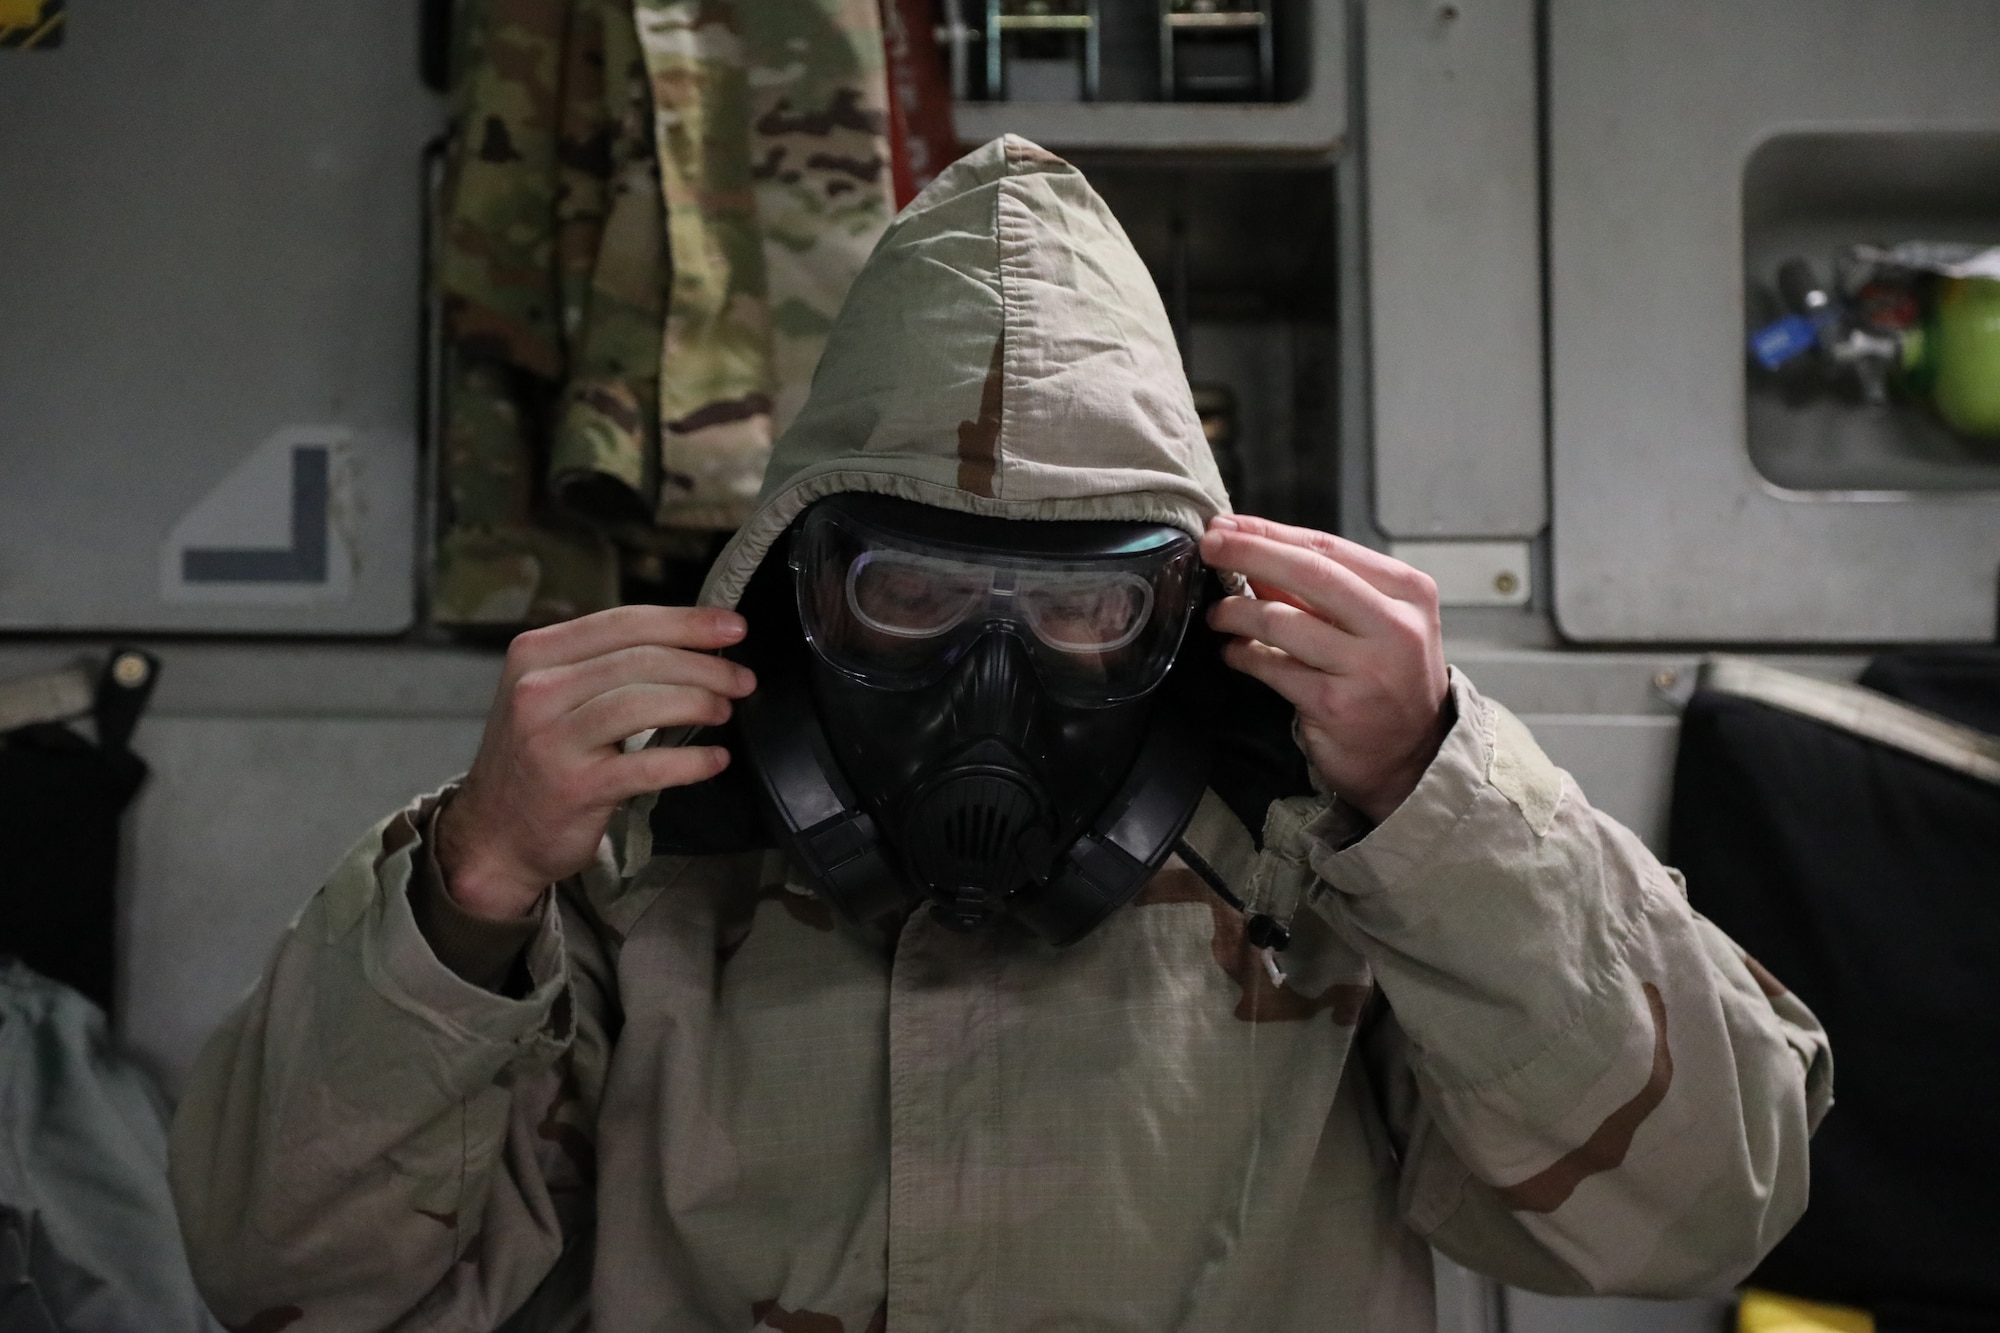 U.S. Air Force Staff Sgt. Jose Chirino, 62nd Aircraft Maintenance Squadron crew chief, dons mission oriented protective posture (MOPP) gear on a C-17 Globemaster III during Exercise Rainier War 21B at Joint Base Lewis-McChord, Washington, Nov. 3, 2021. Rainier War is a semi-annual, large readiness exercise led by 62nd Airlift Wing, designed to train aircrews under realistic scenarios that support a full spectrum readiness operations against modern threats and replicate today’s contingency operations. (U.S. Air Force photo by Senior Airman Christopher Sommers)